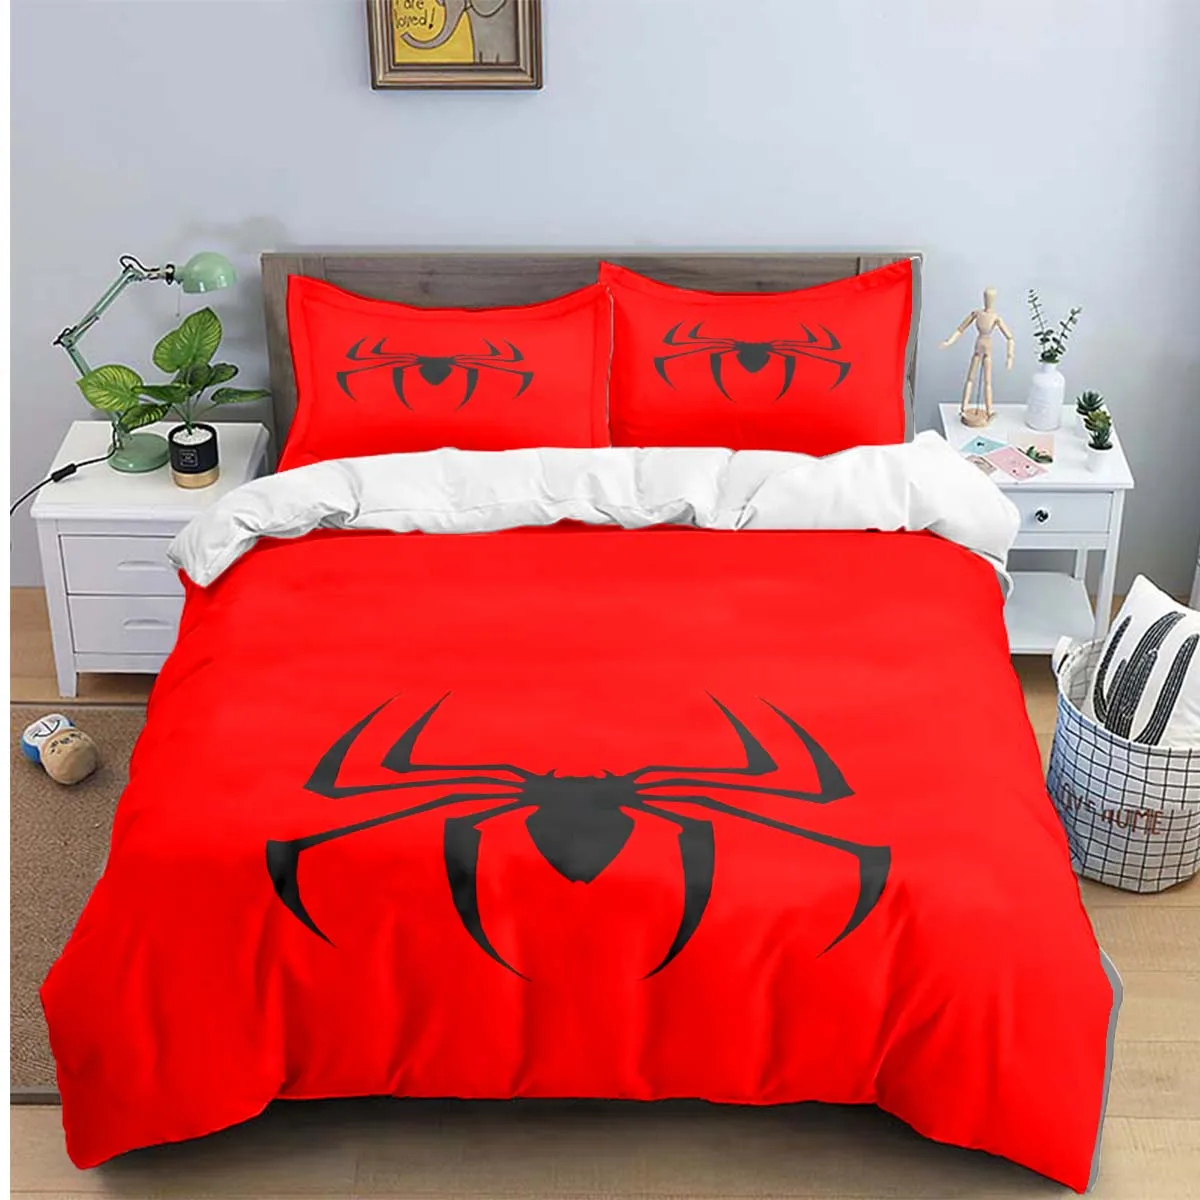 

Exquisite Red Spider Anime Digital Printing Bedding Set Duvet Cover Comforter Bed Youth Kids Girl Boys Birthday Gift